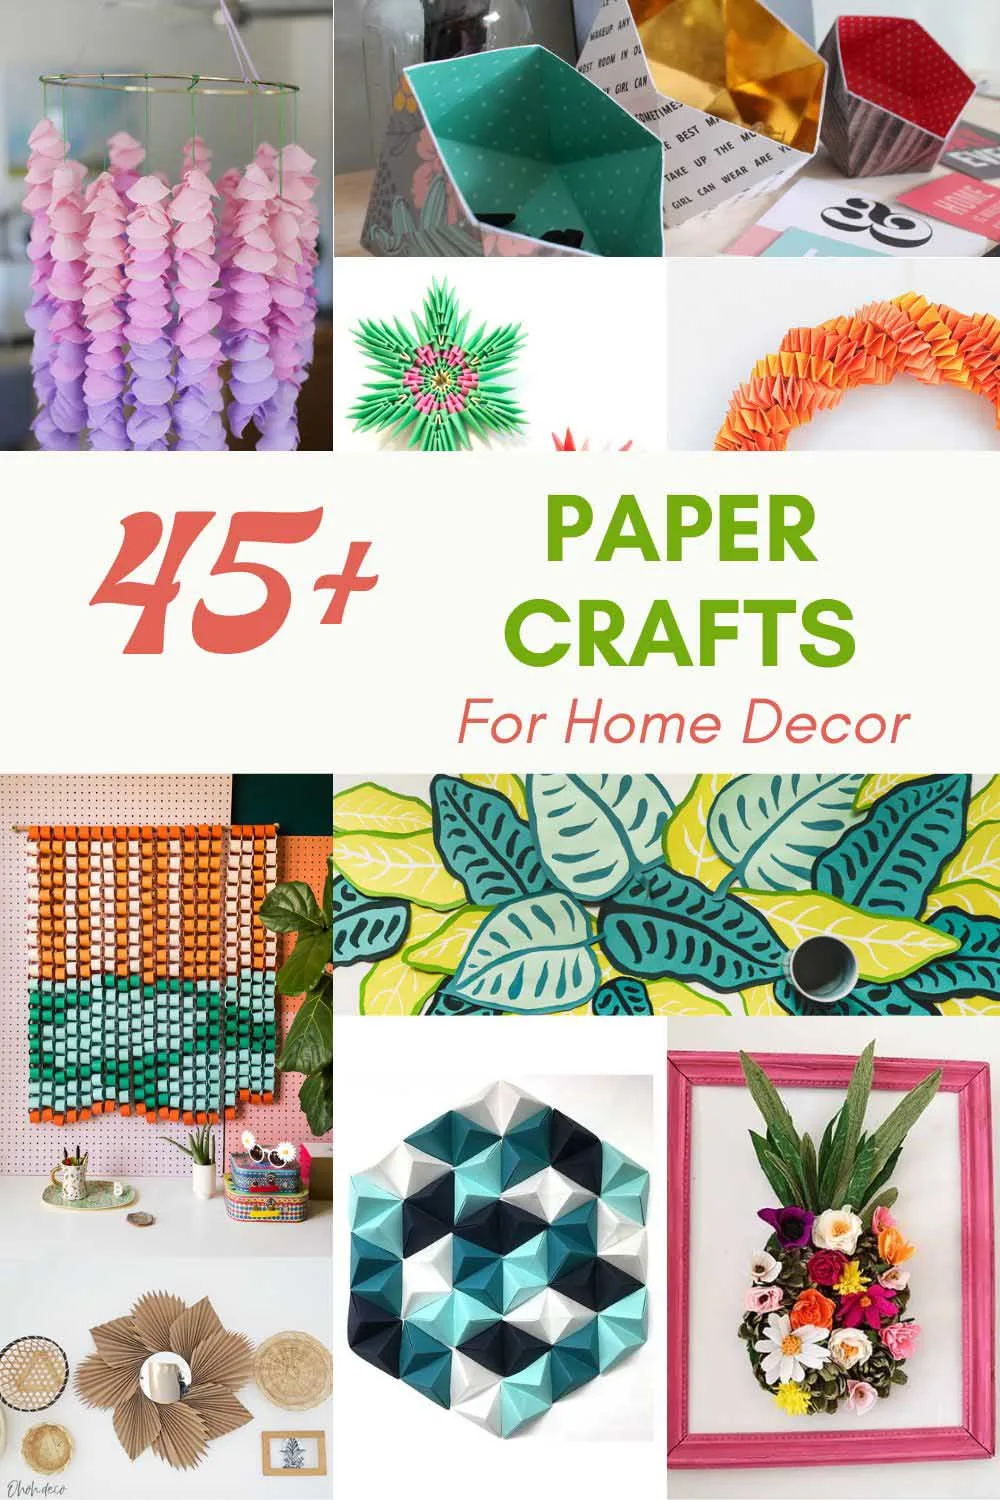 45 Charming Paper Crafts For Home Decor to Brighten Your Space